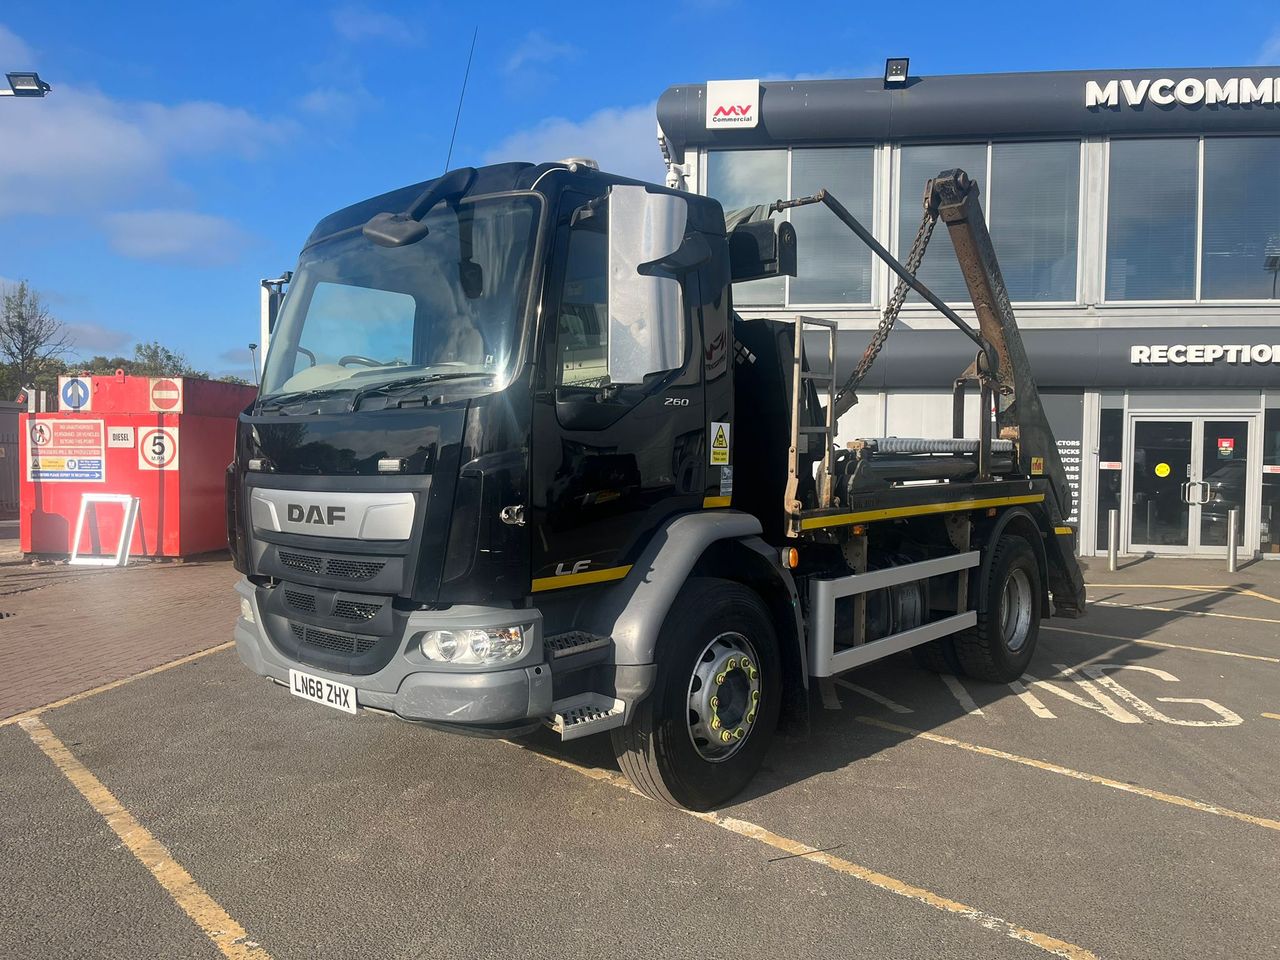 Ready to go DAF LF 260, Skip Loader, 260, 18 Tonne, Day Cab, 6-Speed Manual Gearbox, Rear Window in Cab, 2 Seats in Cab, Multi Function Steering Wheel, Radio, Hyva Autosheet, , -, - | for sale at MV Commercial, the UKs leading Truck, Trailers and Van supplier. (LN68ZHX 100118)